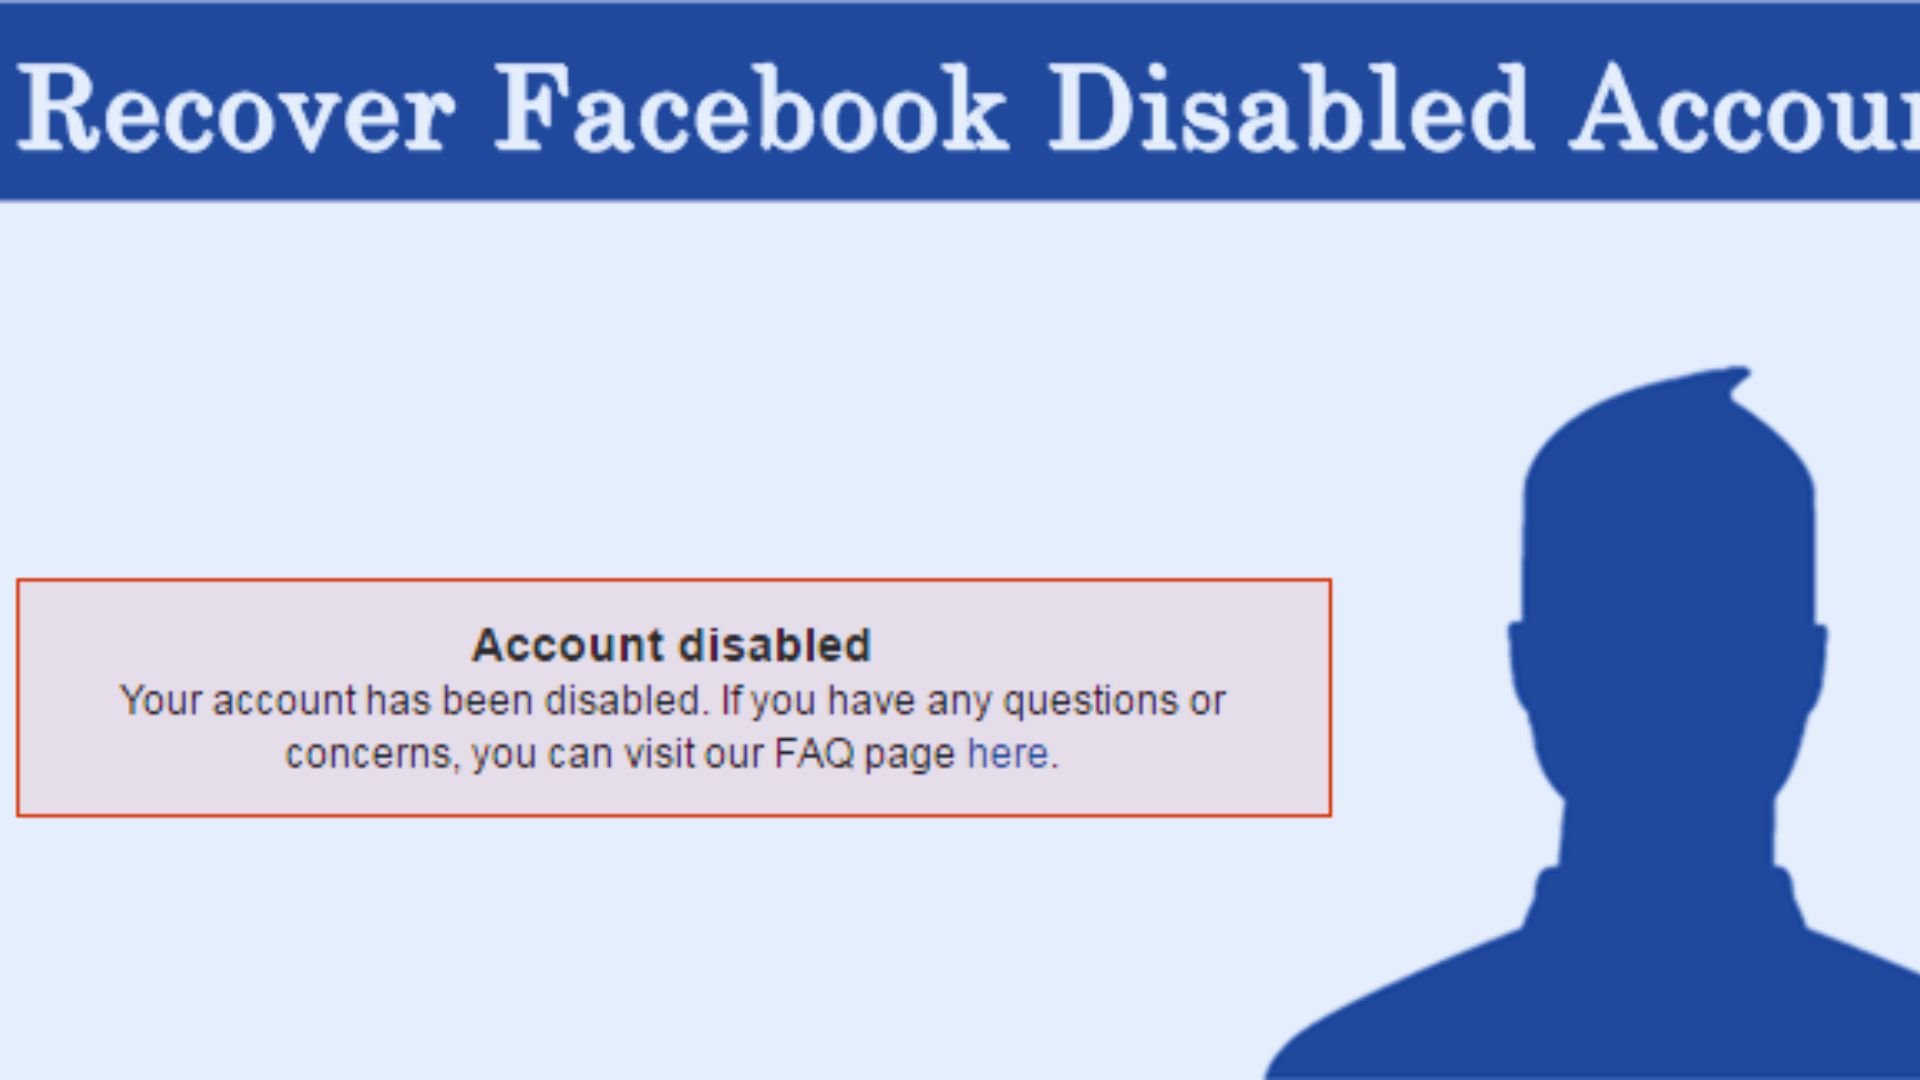 Check If Your Account Is Disabled